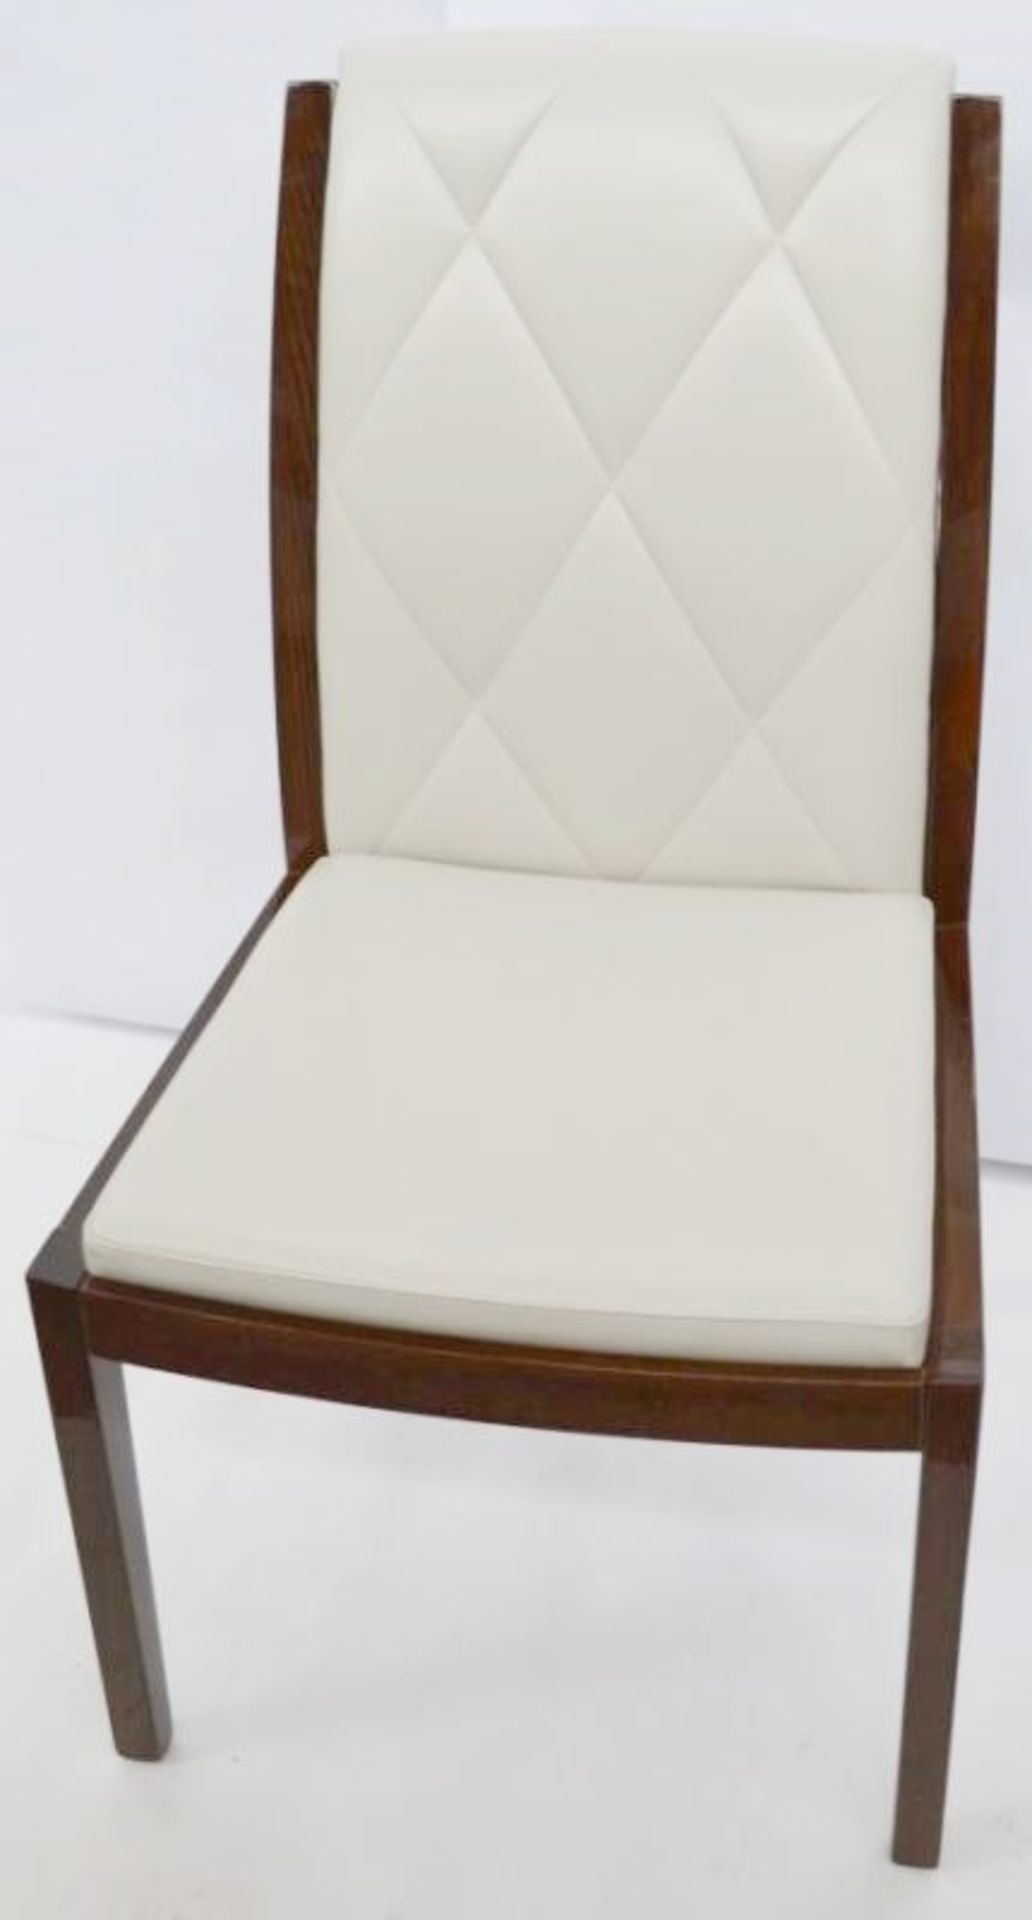 6 x KESTERPORT Dress Code Leather Side Chairs - W53cm x D59cm x H93cm, Seat Height: 50cm - Ref: - Image 2 of 9